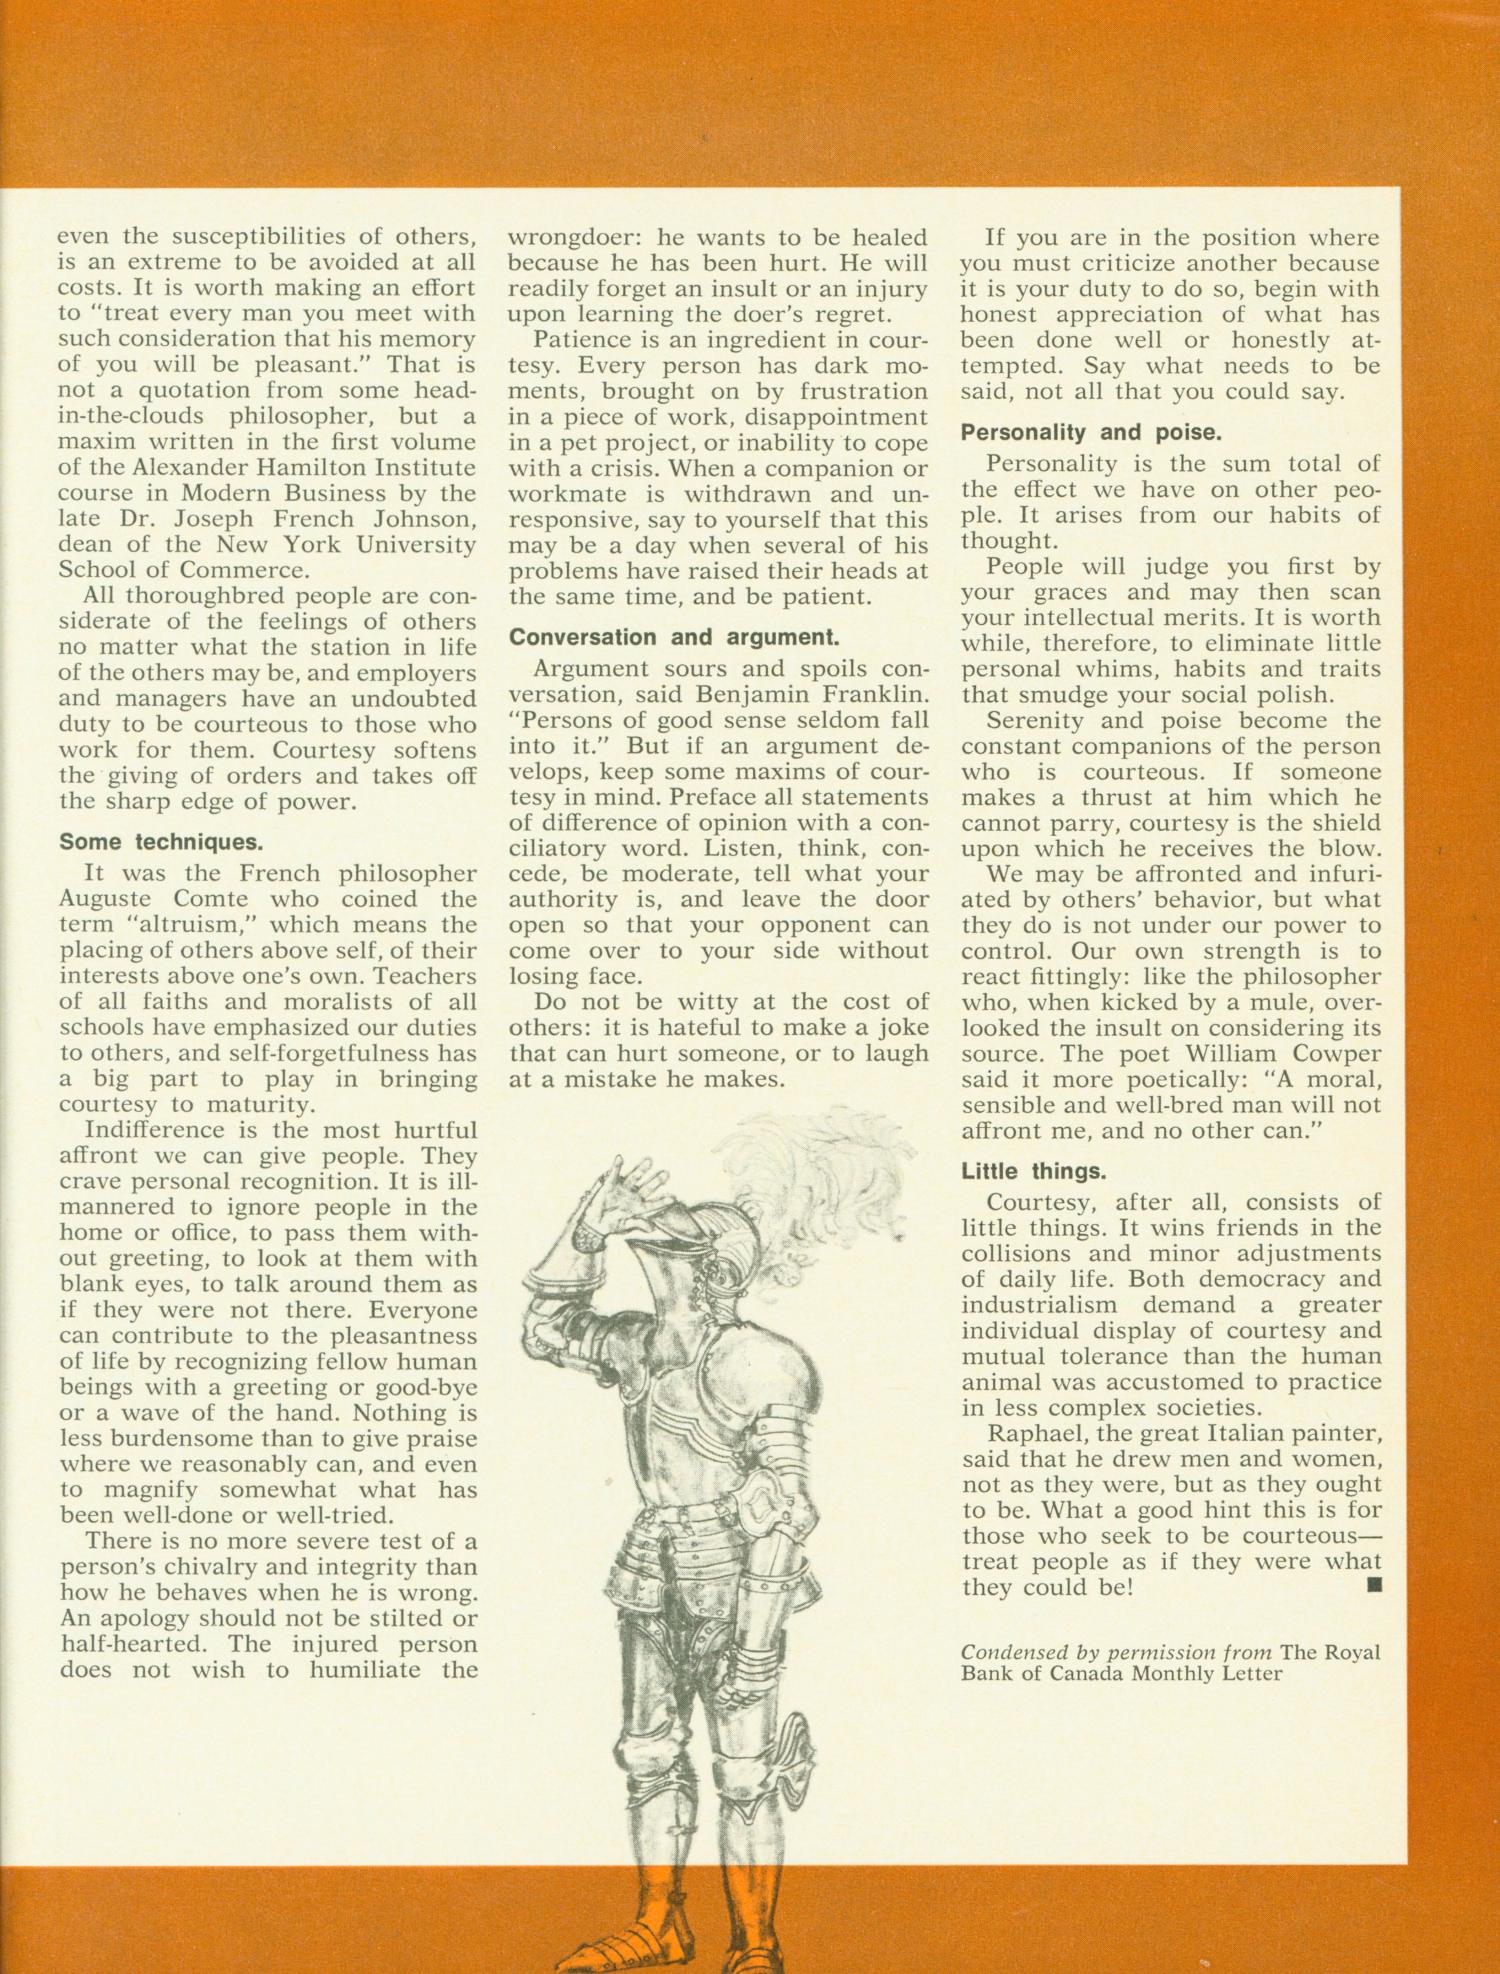 Scouting, Volume 61, Number 3, March-April 1973
                                                
                                                    15
                                                